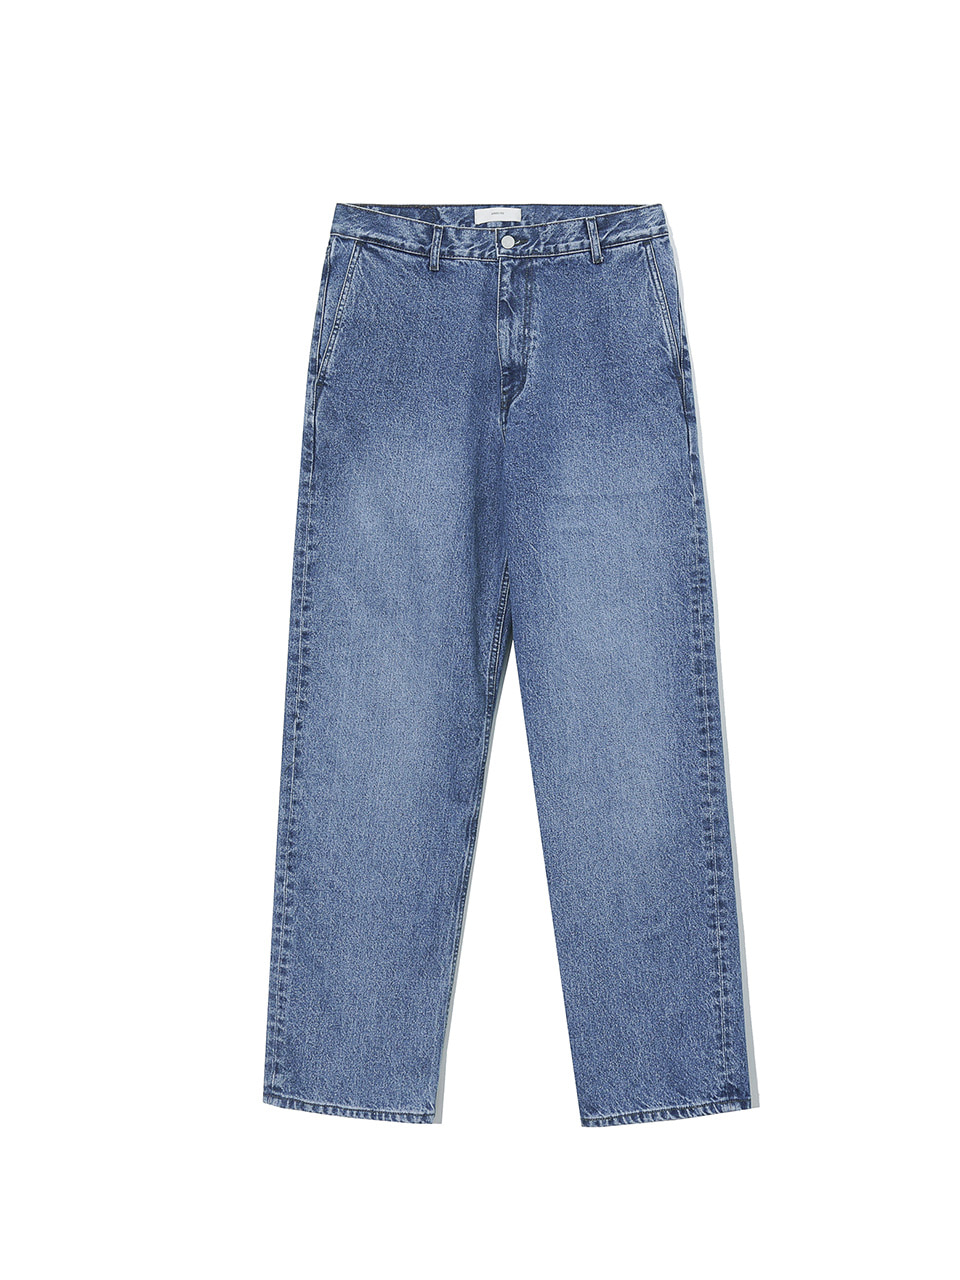 [Ourselves] ORGANIC COTTON RELAXED DENIM PANTS (Bleached indigo)